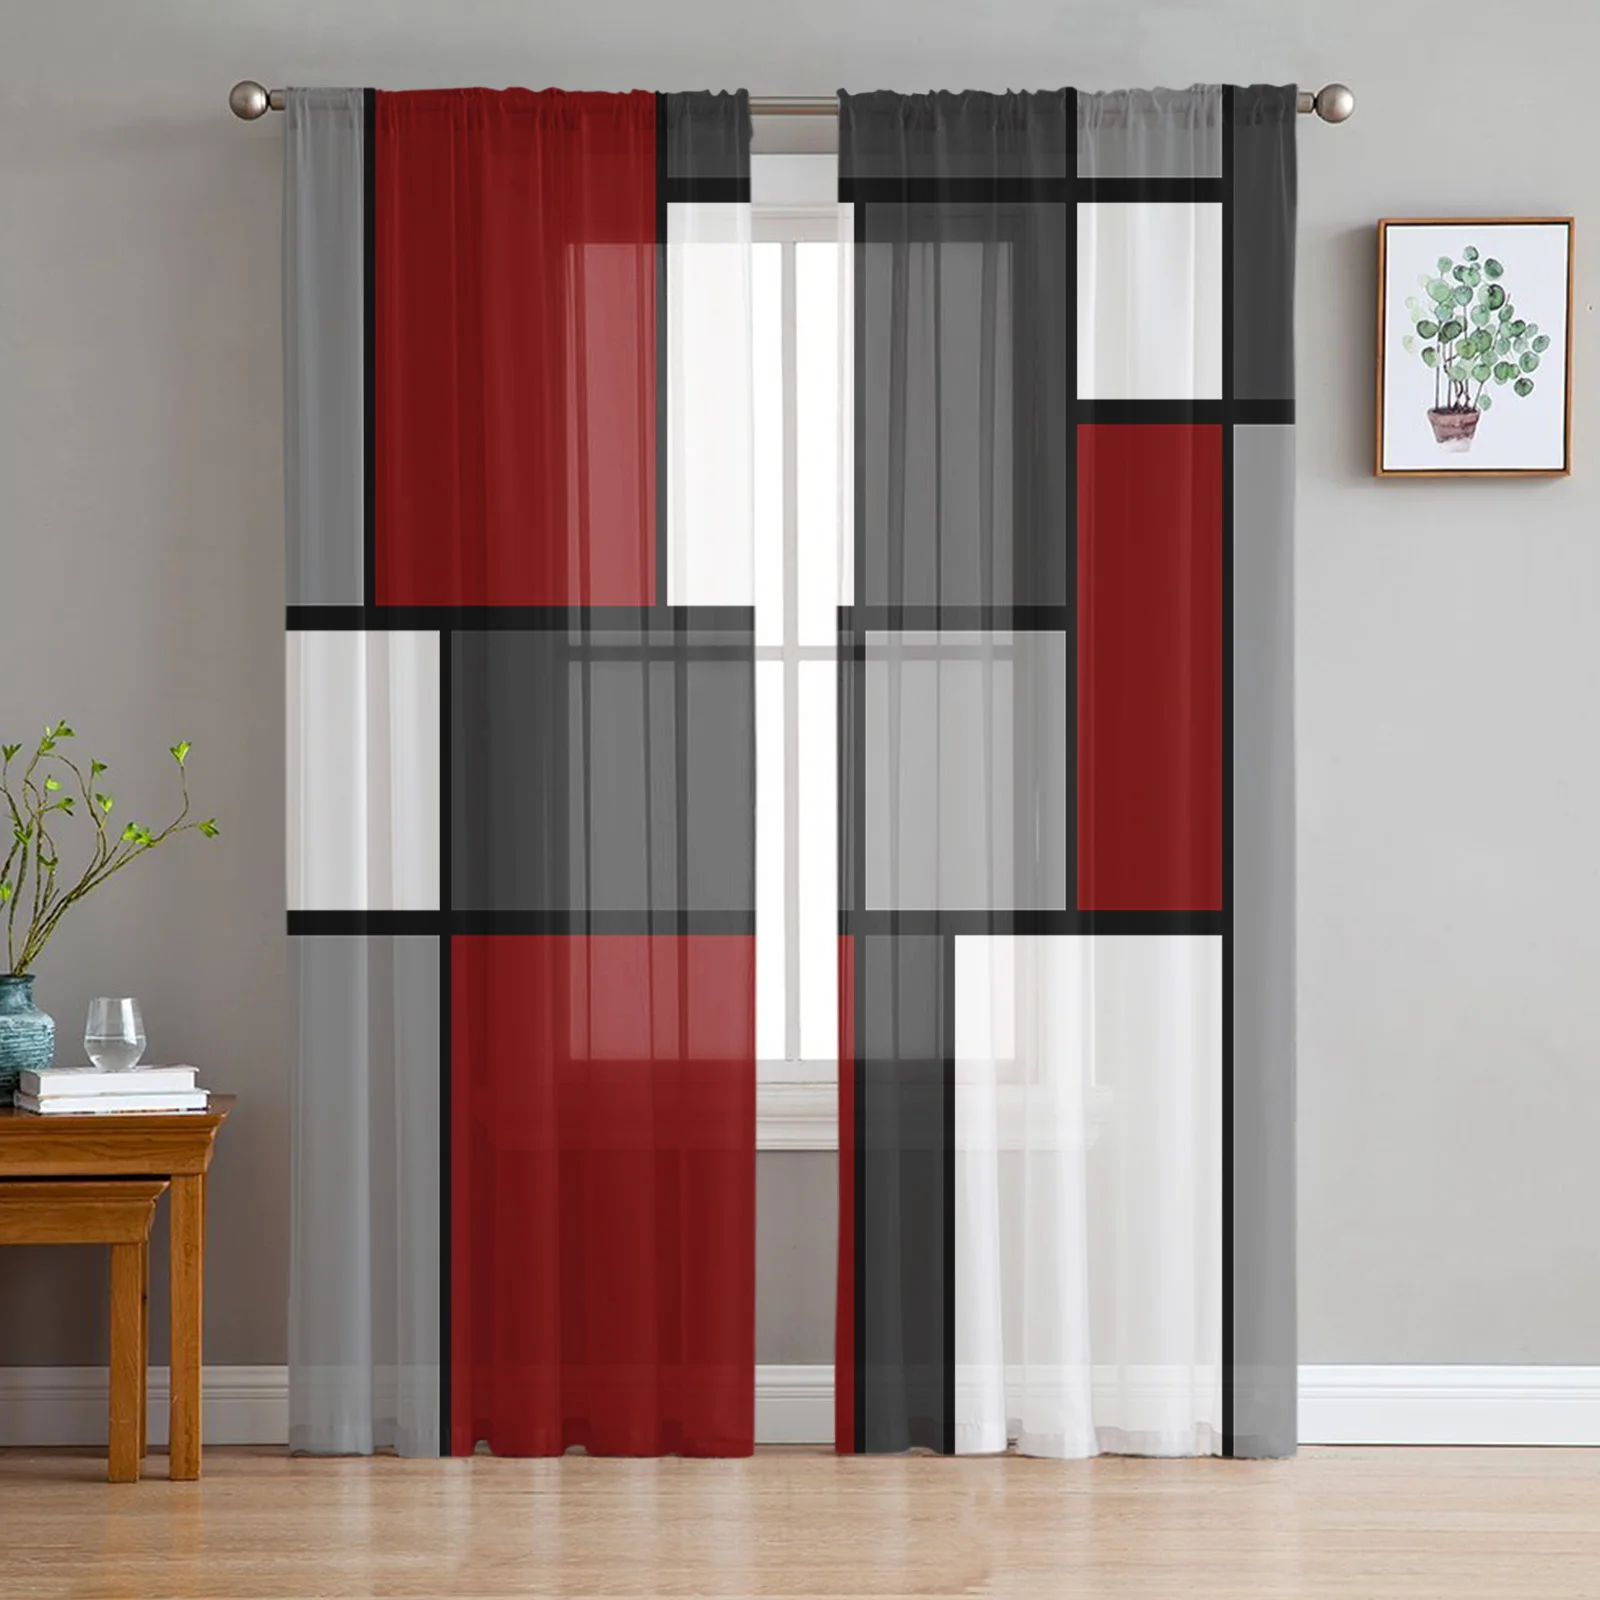 

Geometry Red Abstract Sheer Curtains for Bedroom Living Room Decoration Window Curtain for Kitchen Tulle Voile Organza Drapes